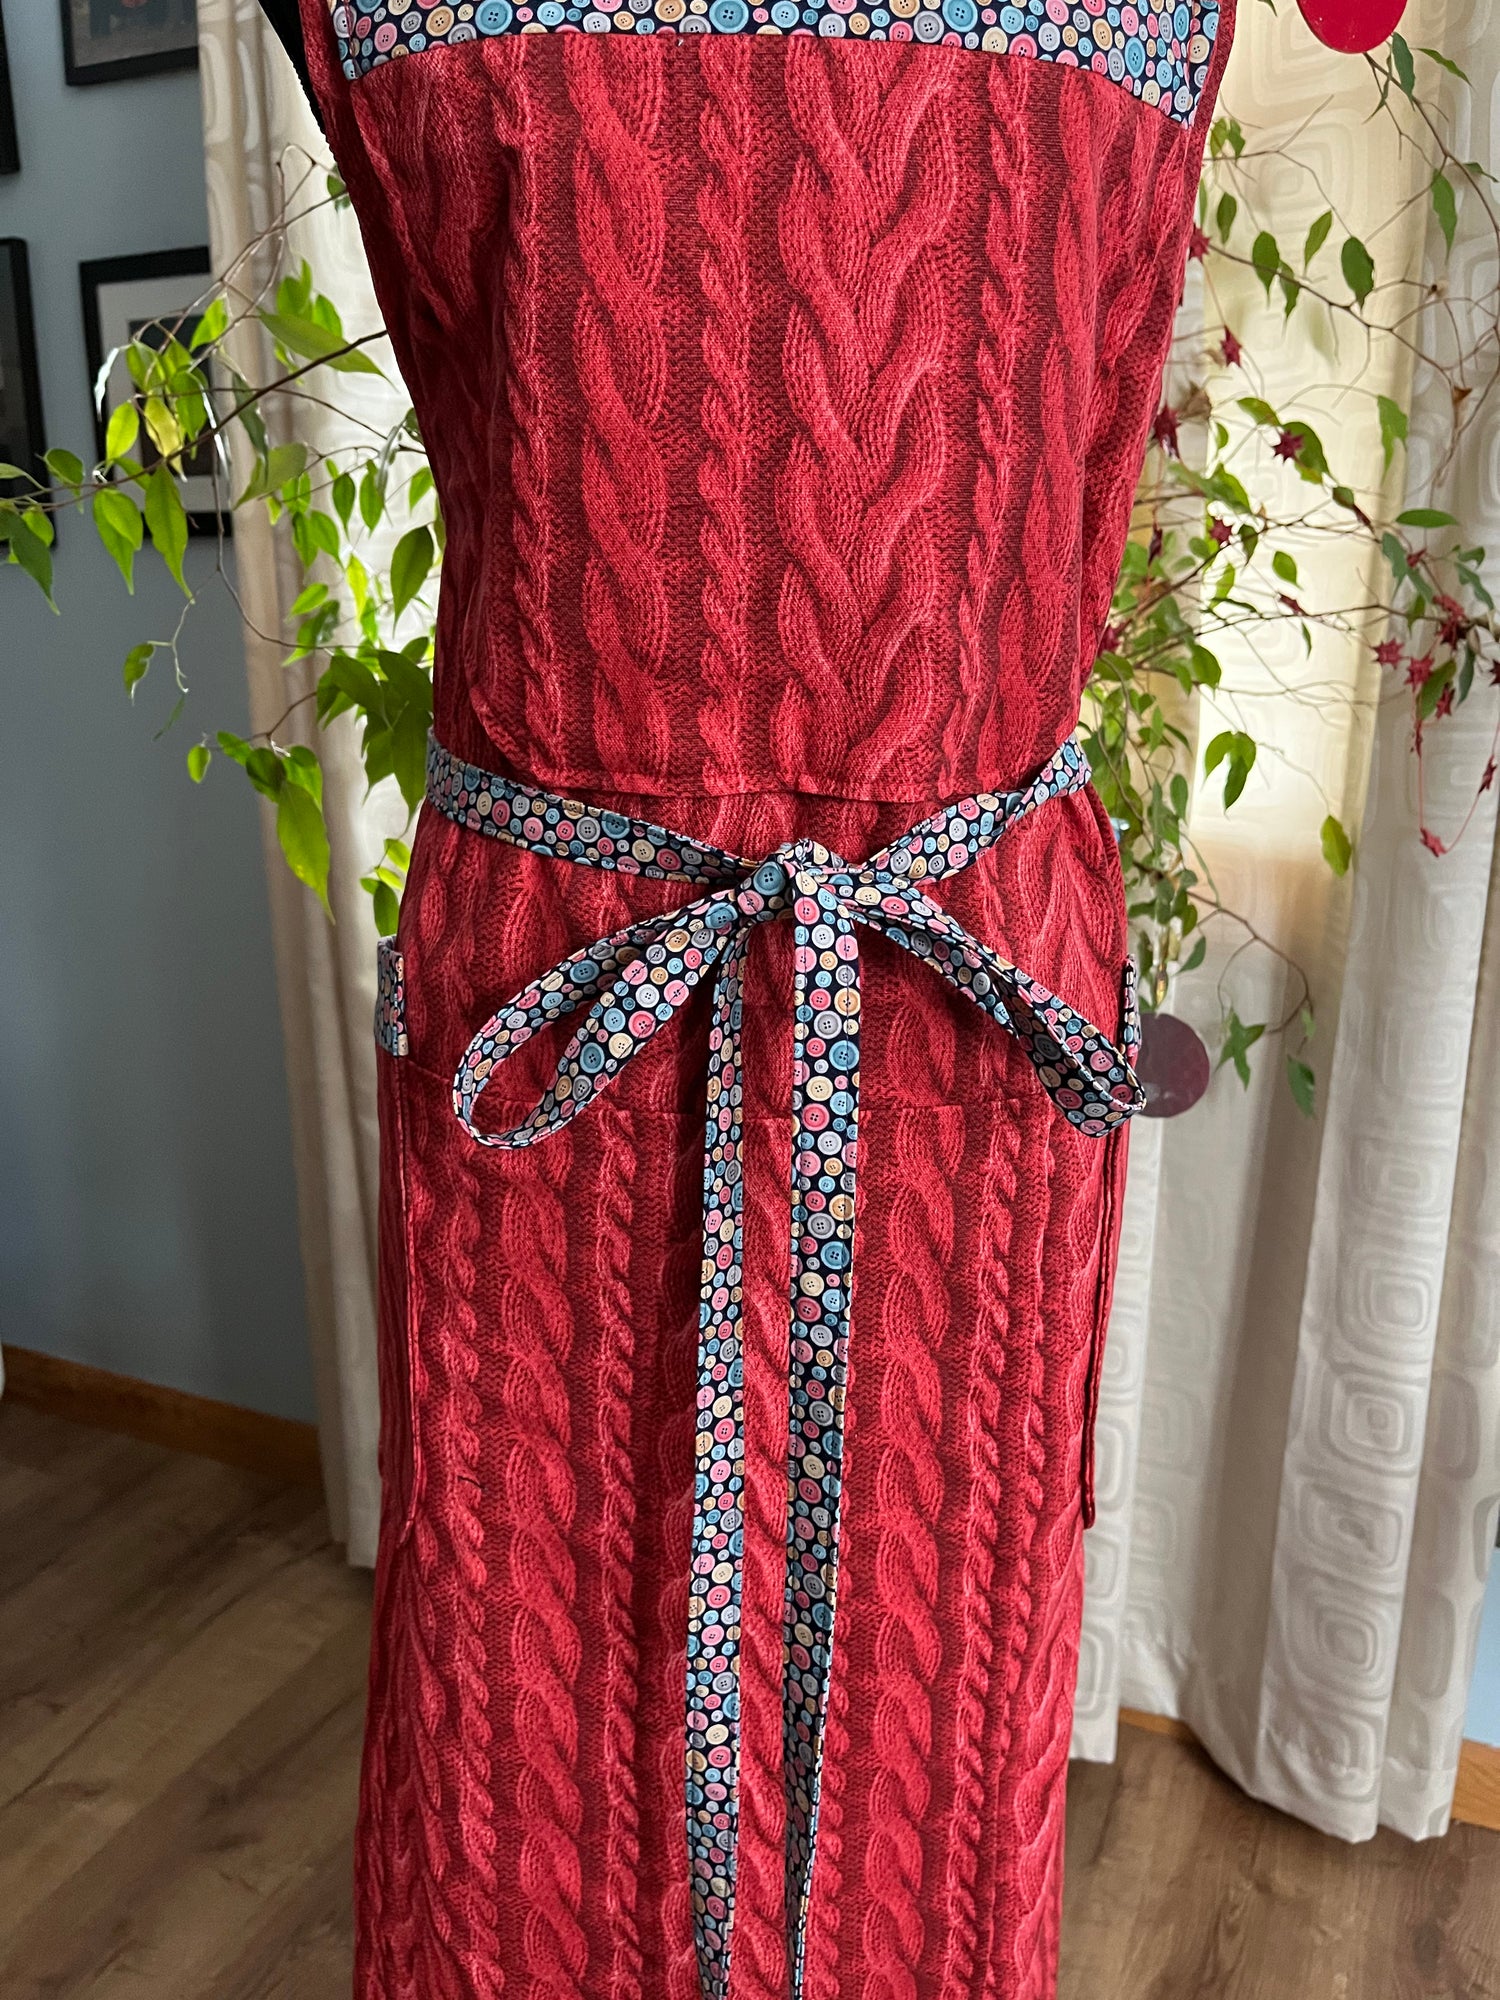 Split-leg Pottery Apron - Red Cable Knit Print with buttons trim